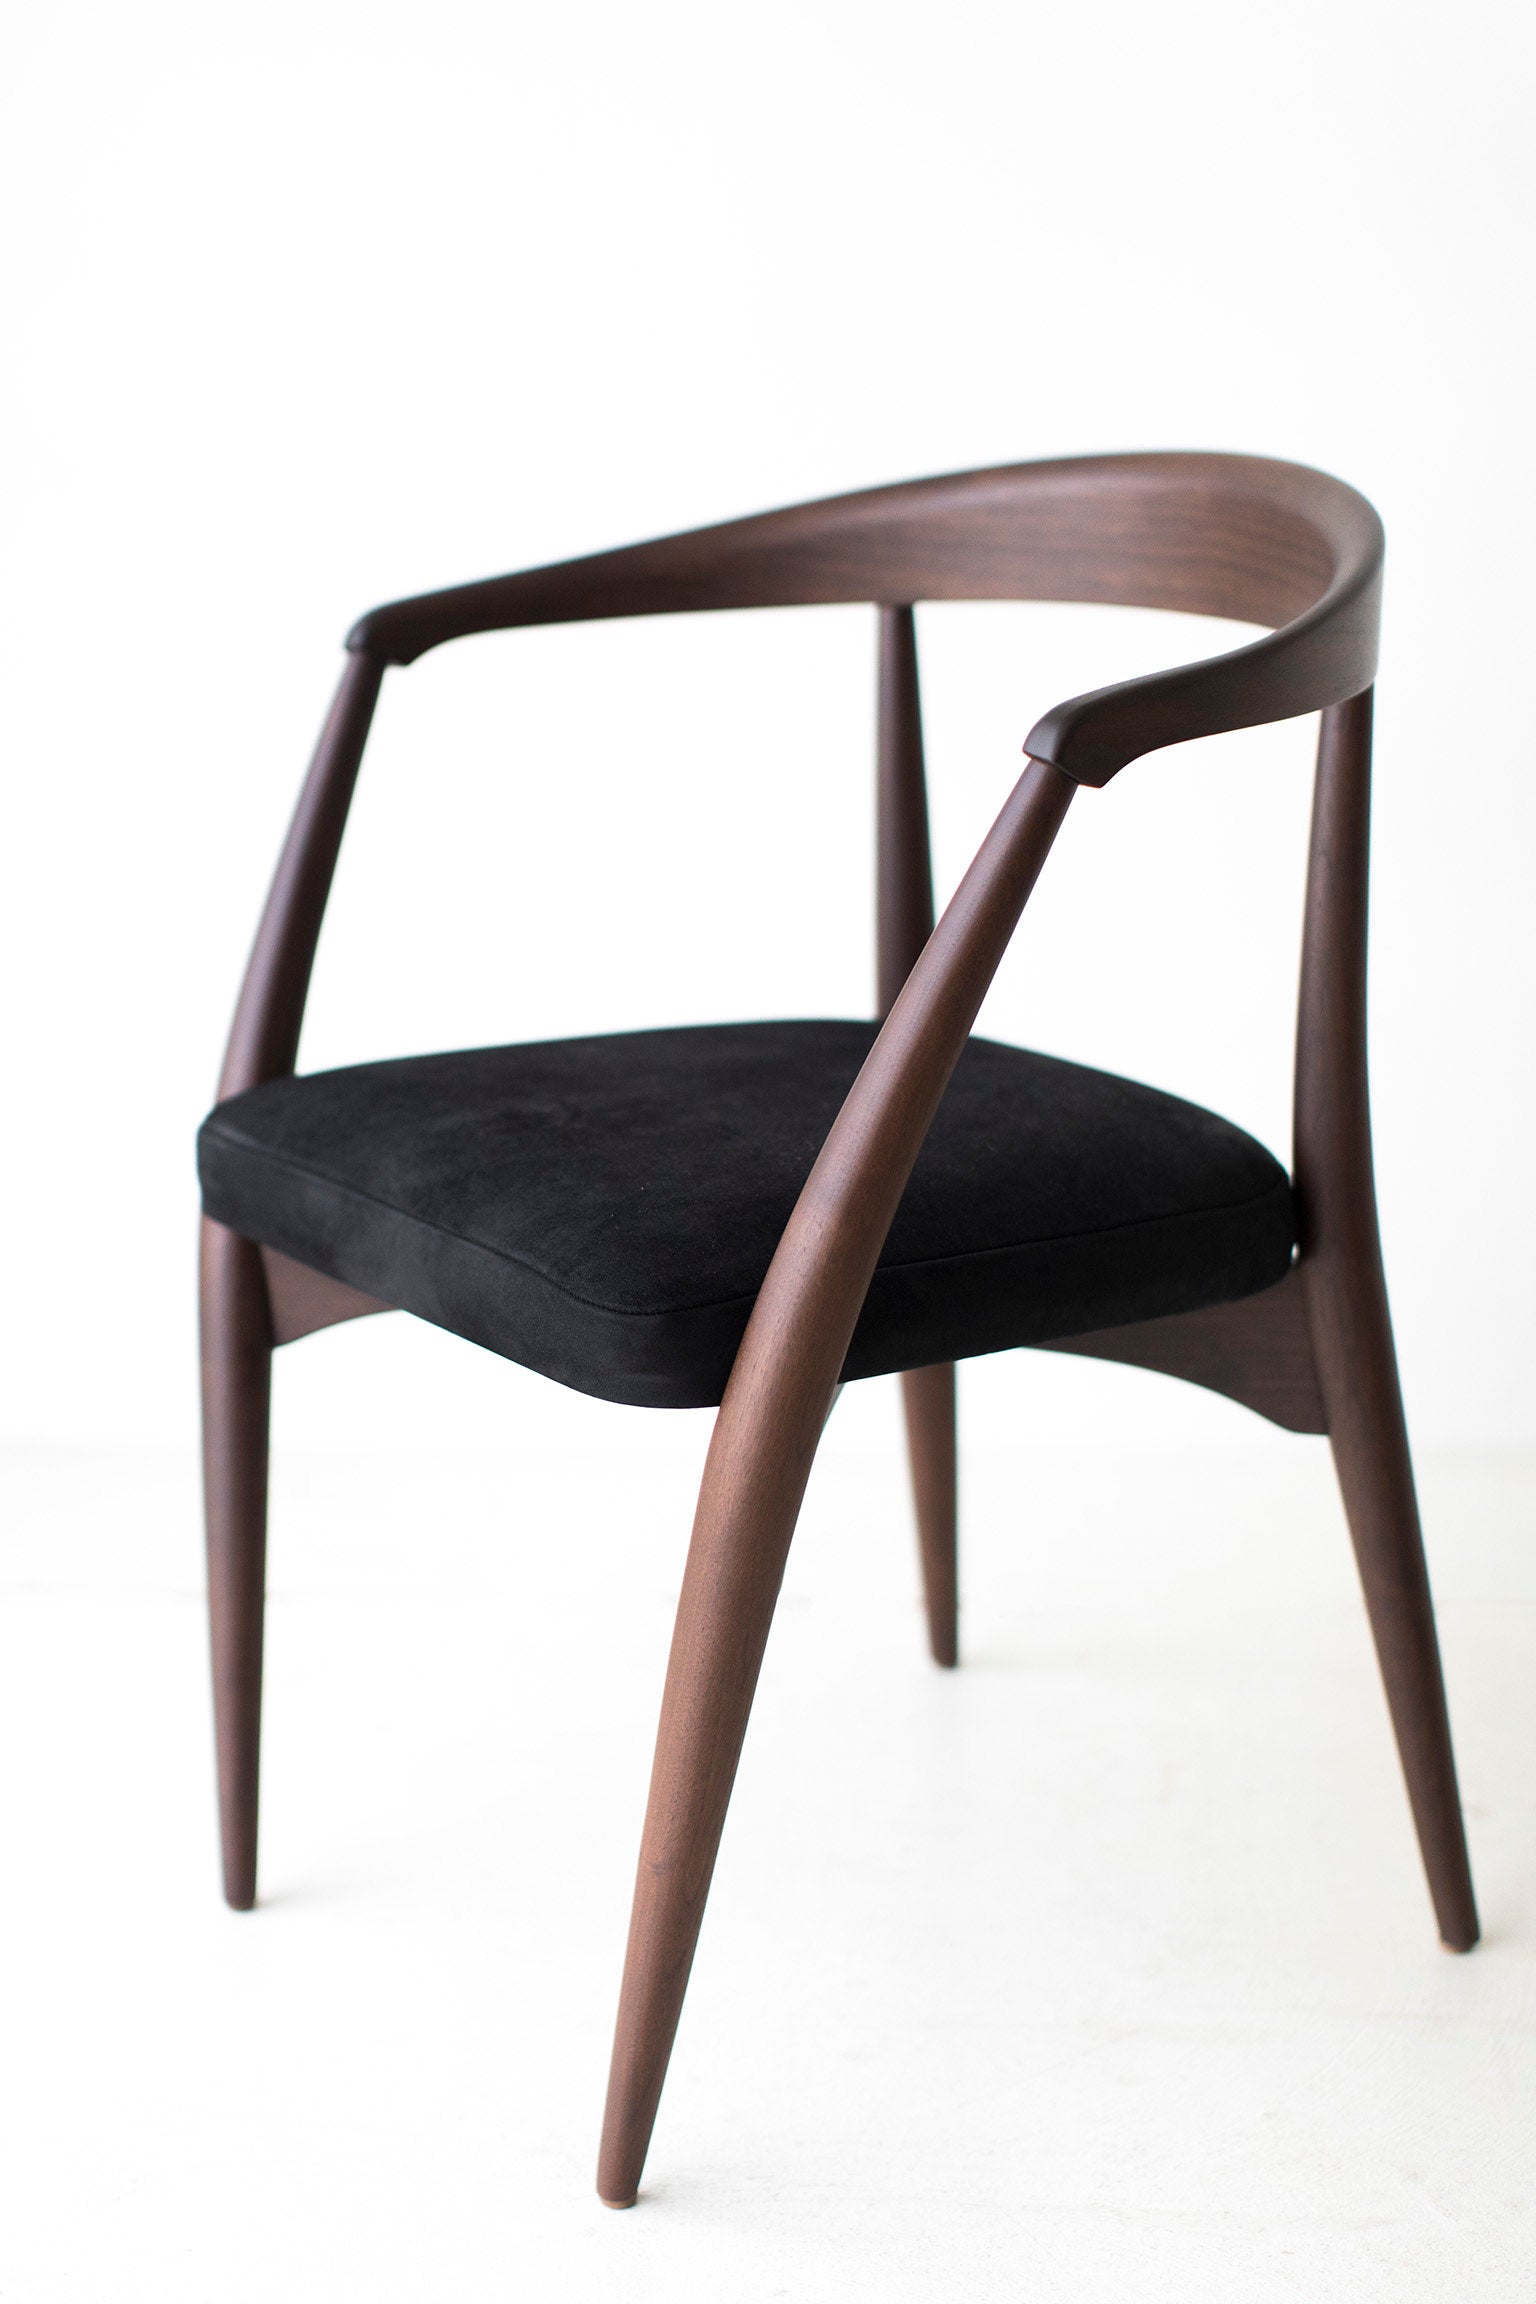 Lawrence Peabody Dining Chairs - P-1708 - Craft Associates® Furniture